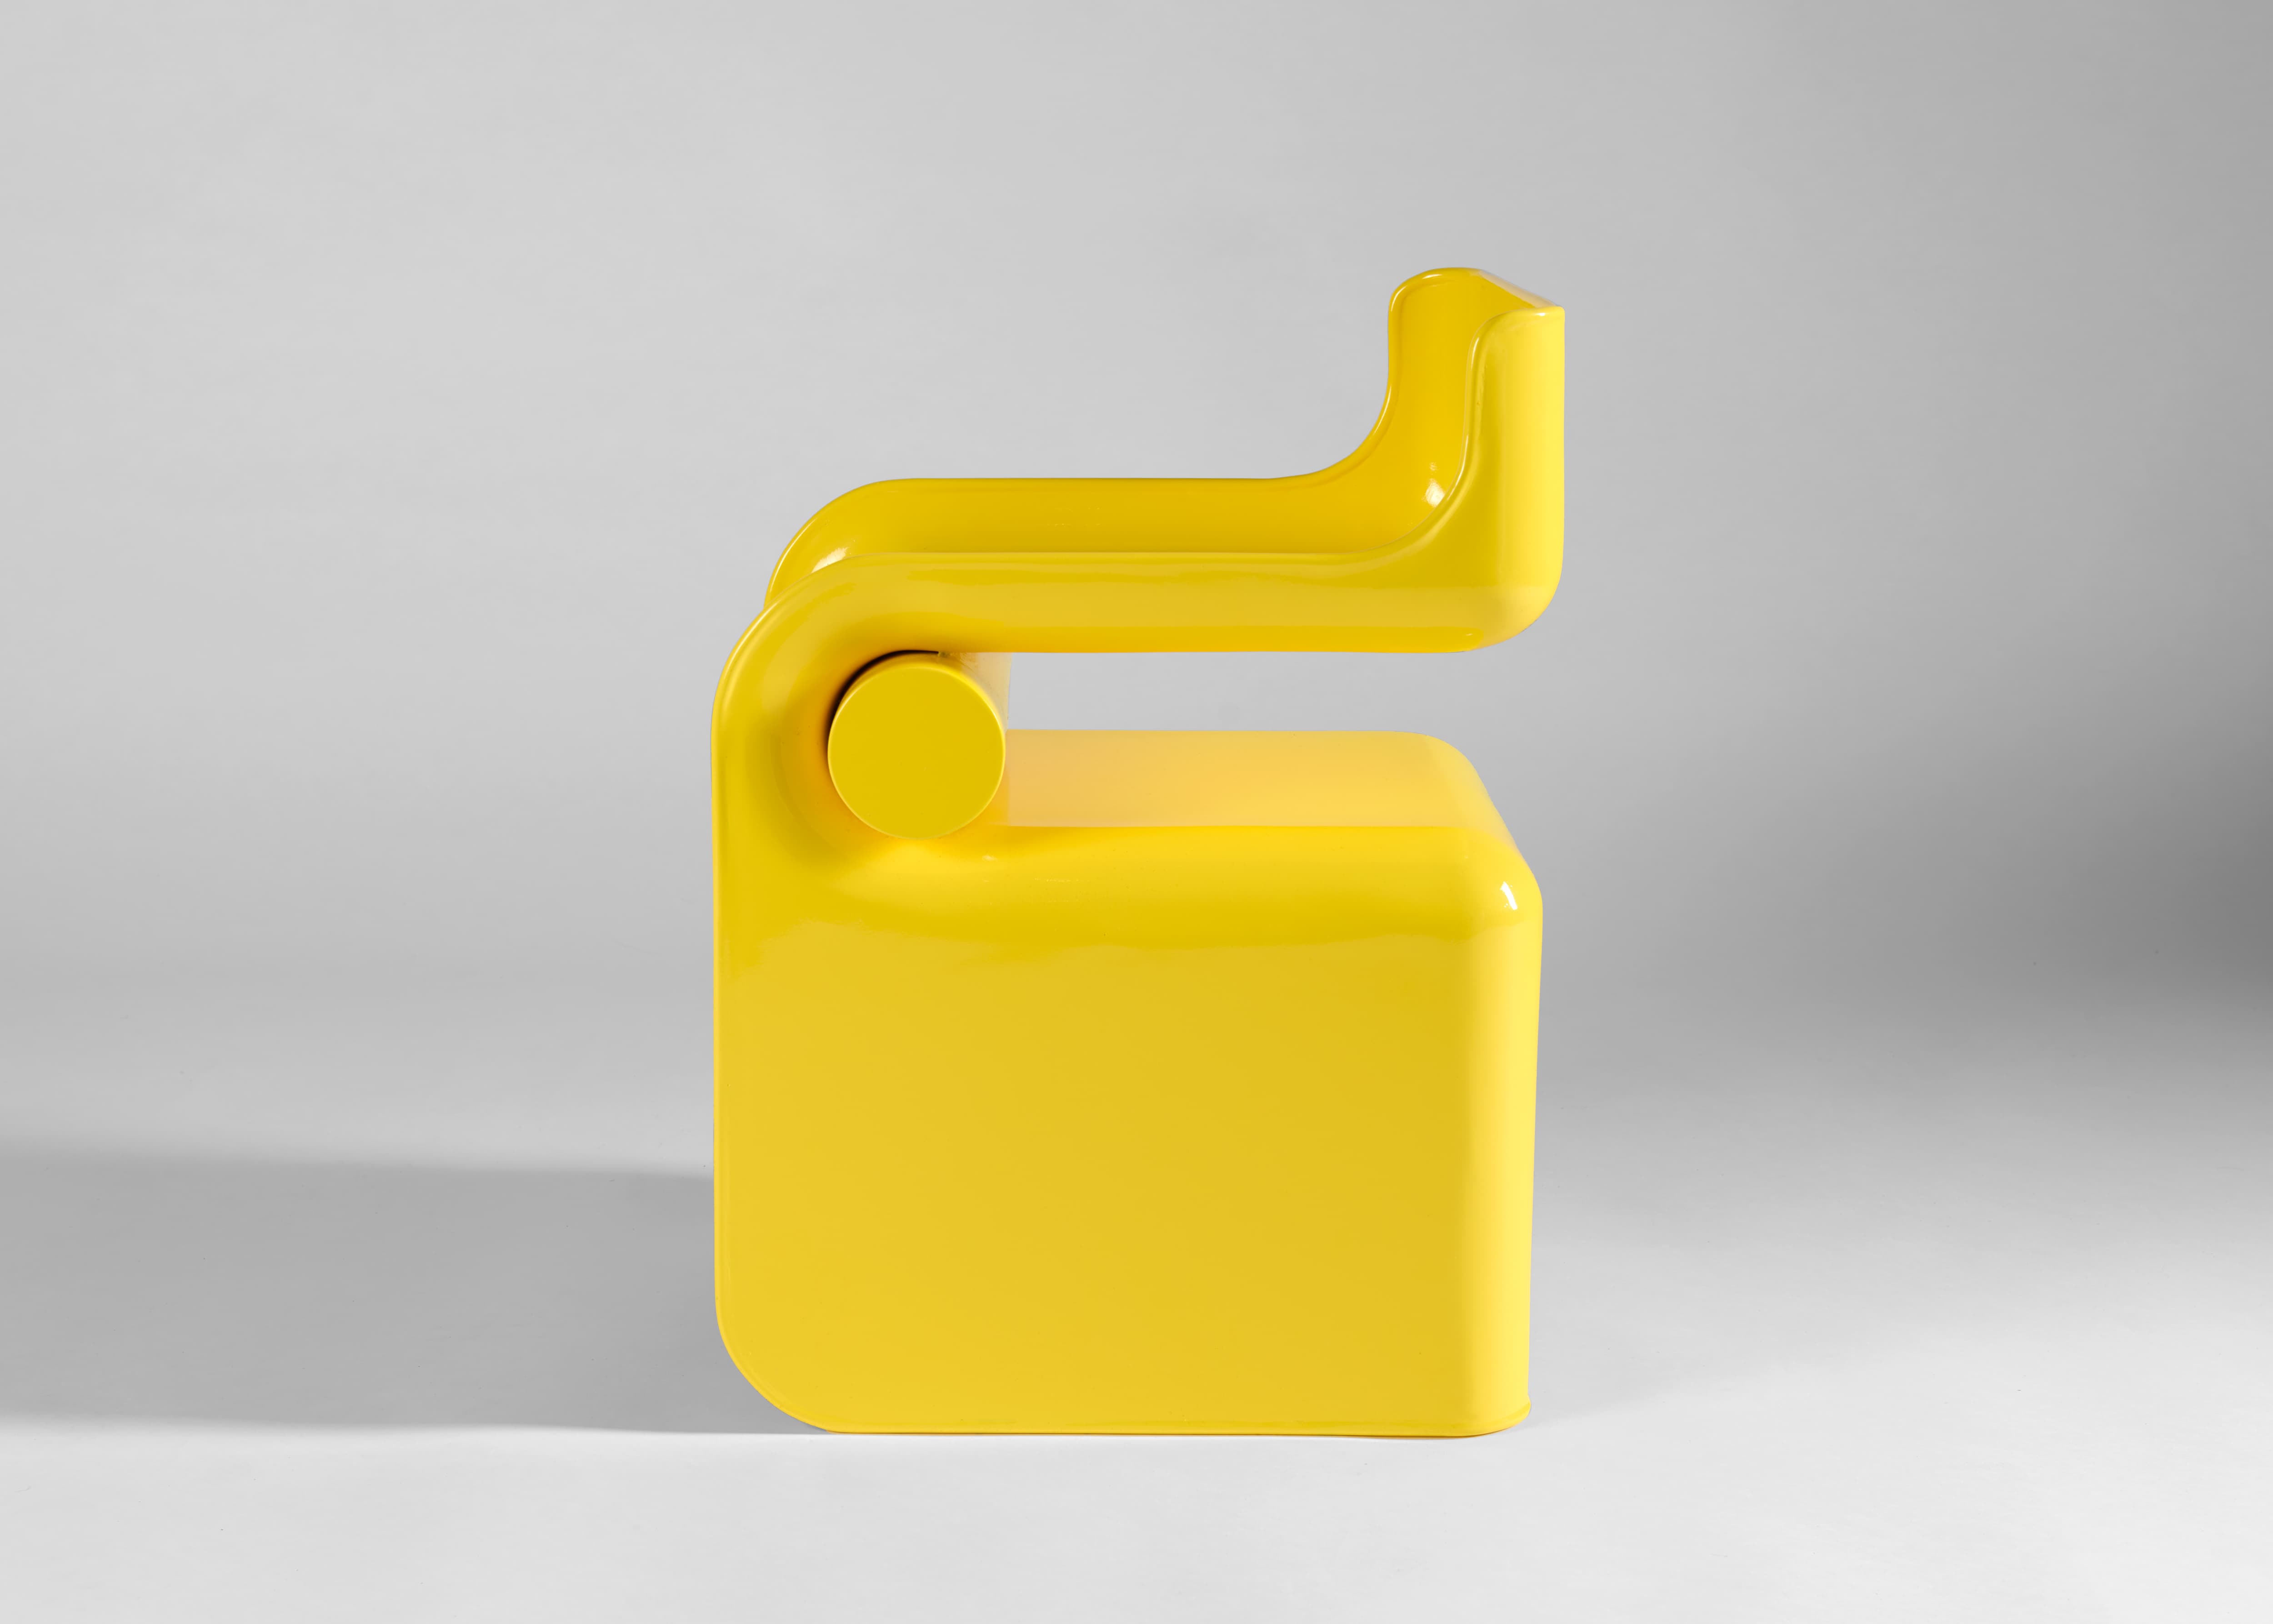 Robusto Dining Chair design by Studio Carol Egan, a Side Elevation view showing Robusto Dining Chair in yellow color. Fabricated in Fiberglass. Armless chair with cantilevered seat and cylinder element. Measures 24”h x 18”w X 19”d x 16”SH